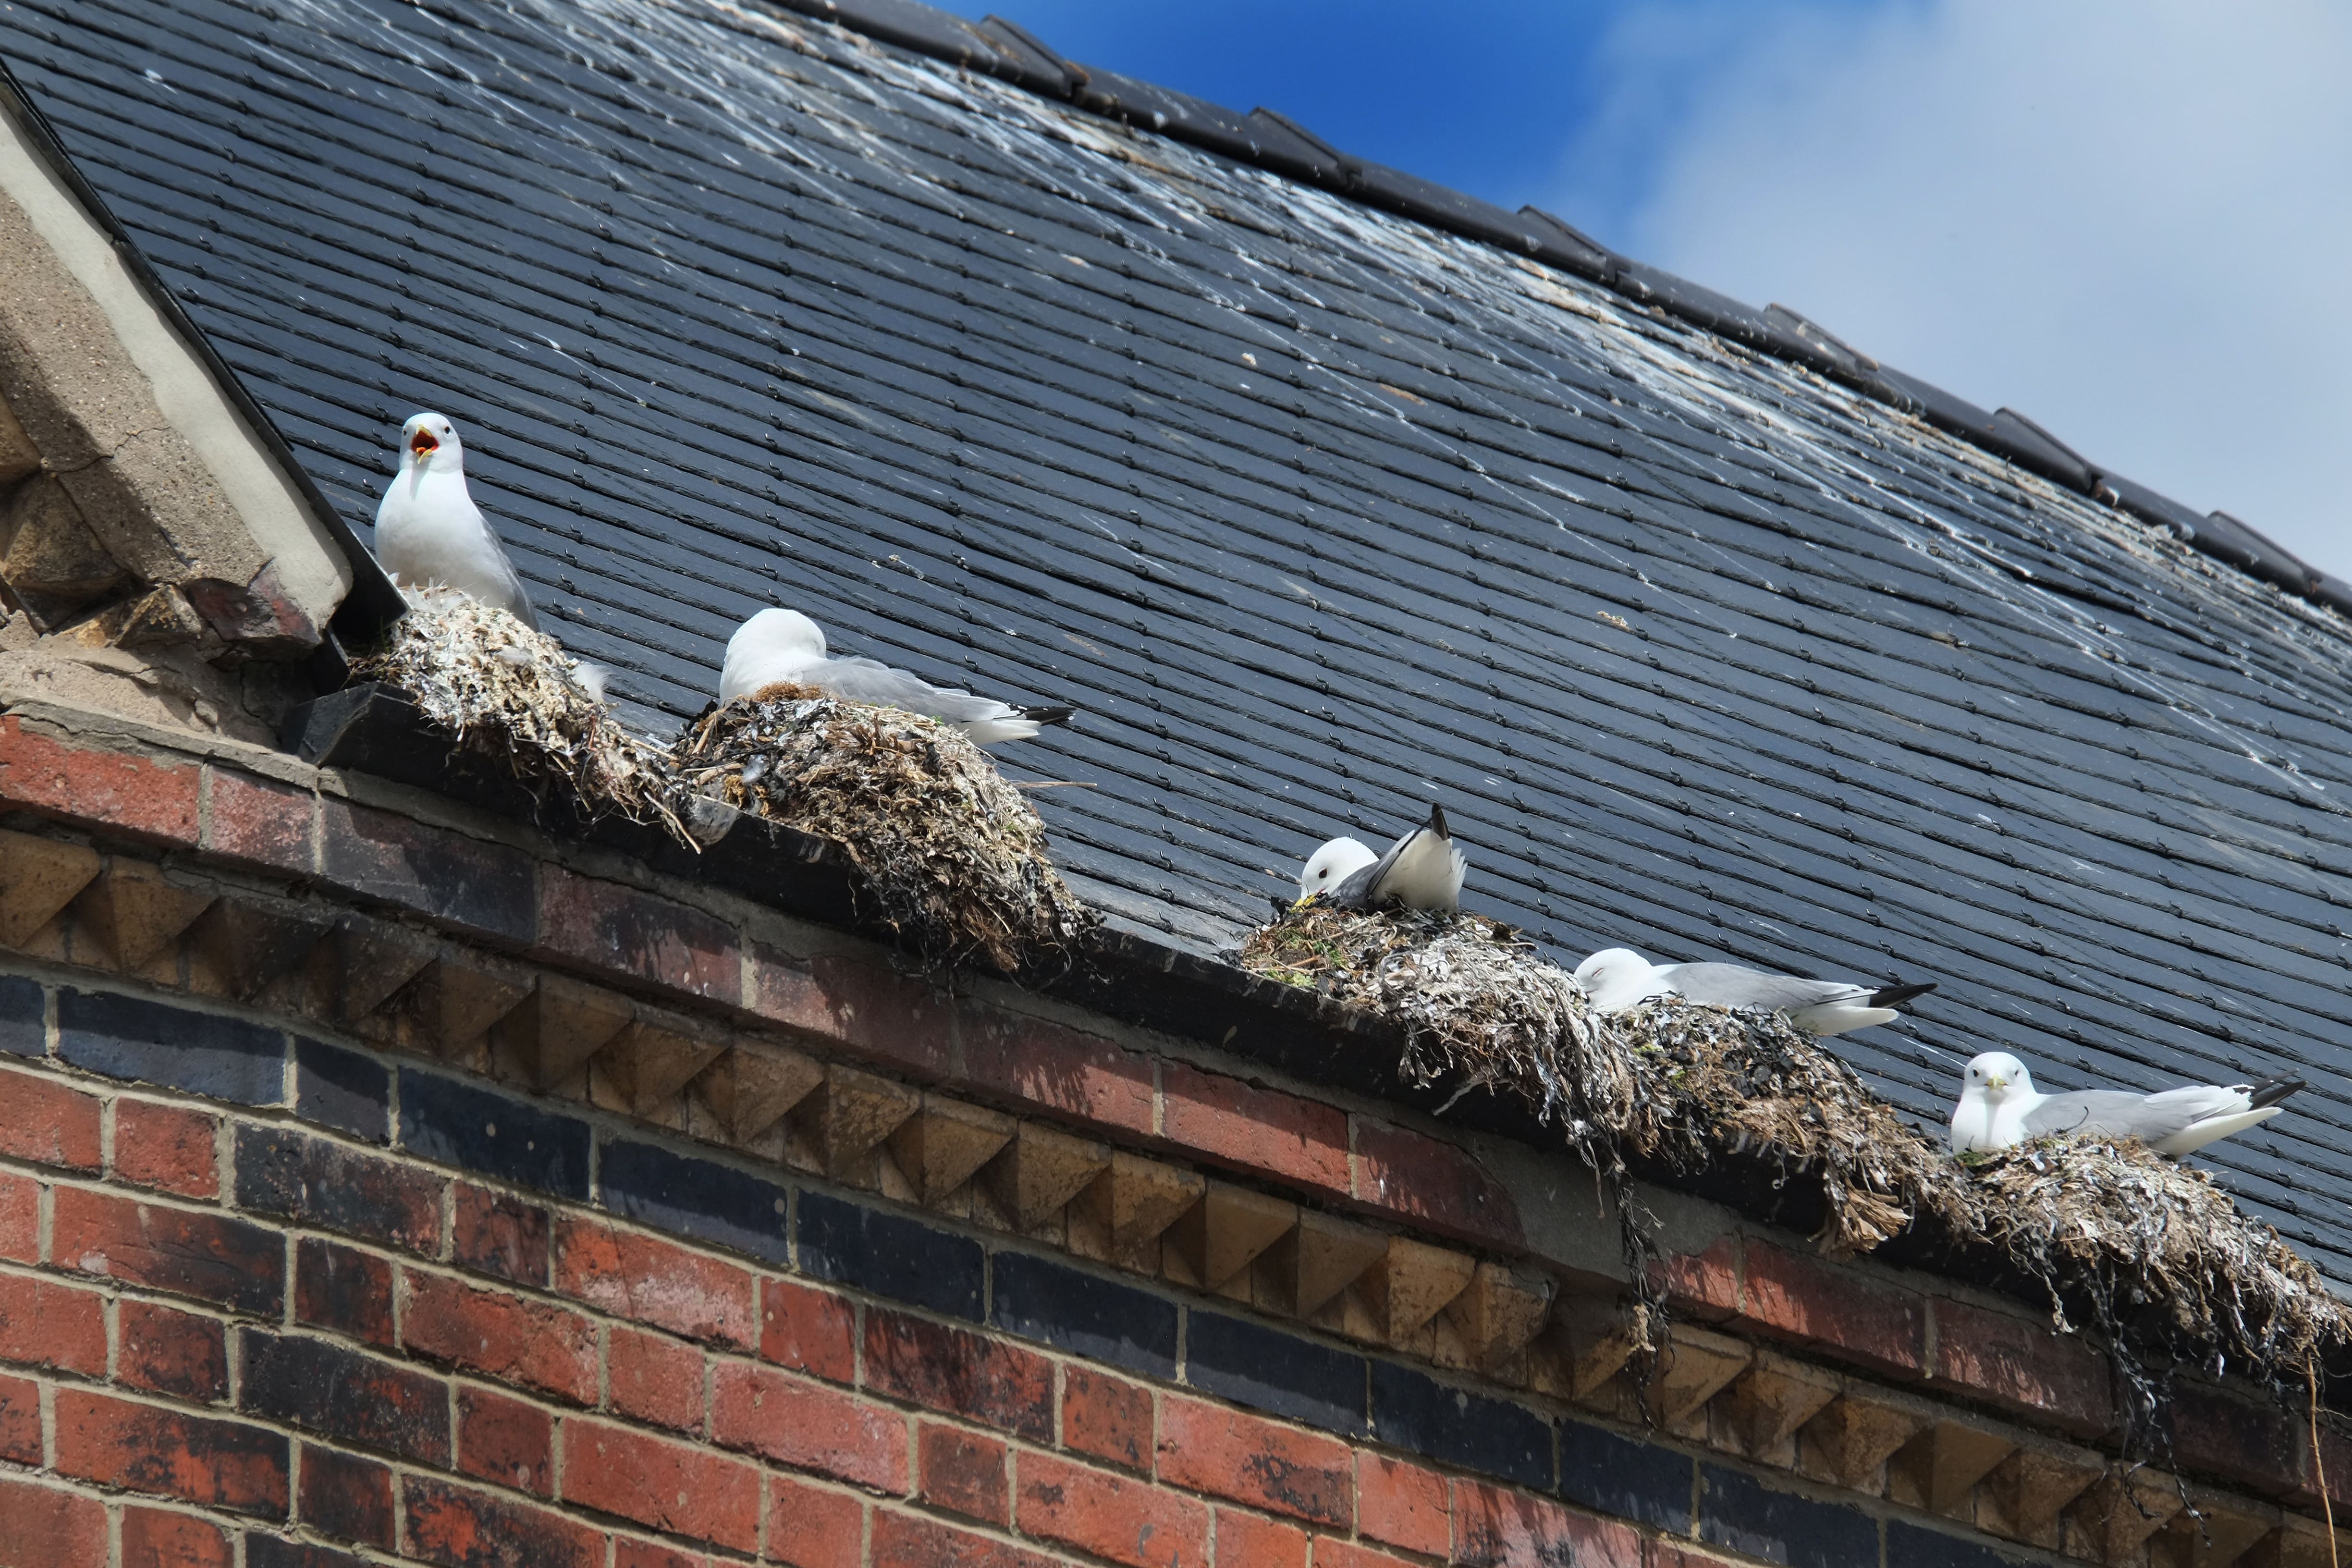 Birds made nest on rooftop